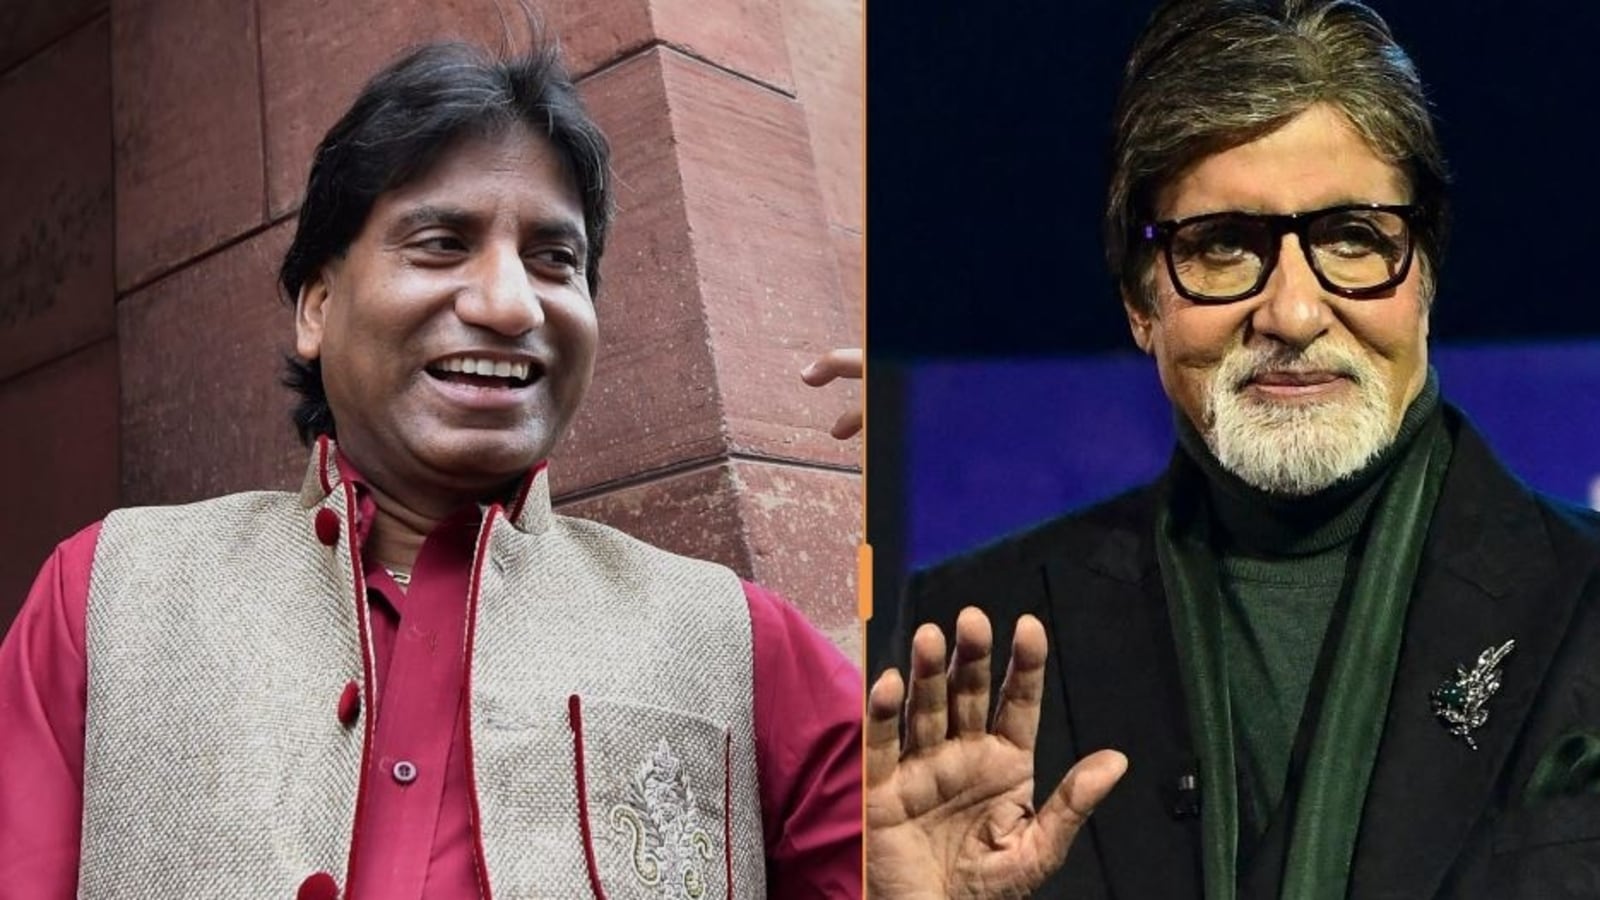 amitabh-bachchan-confirms-he-sent-a-note-for-raju-srivastava-he-opened-his-eye-a-bit-and-then-went-away